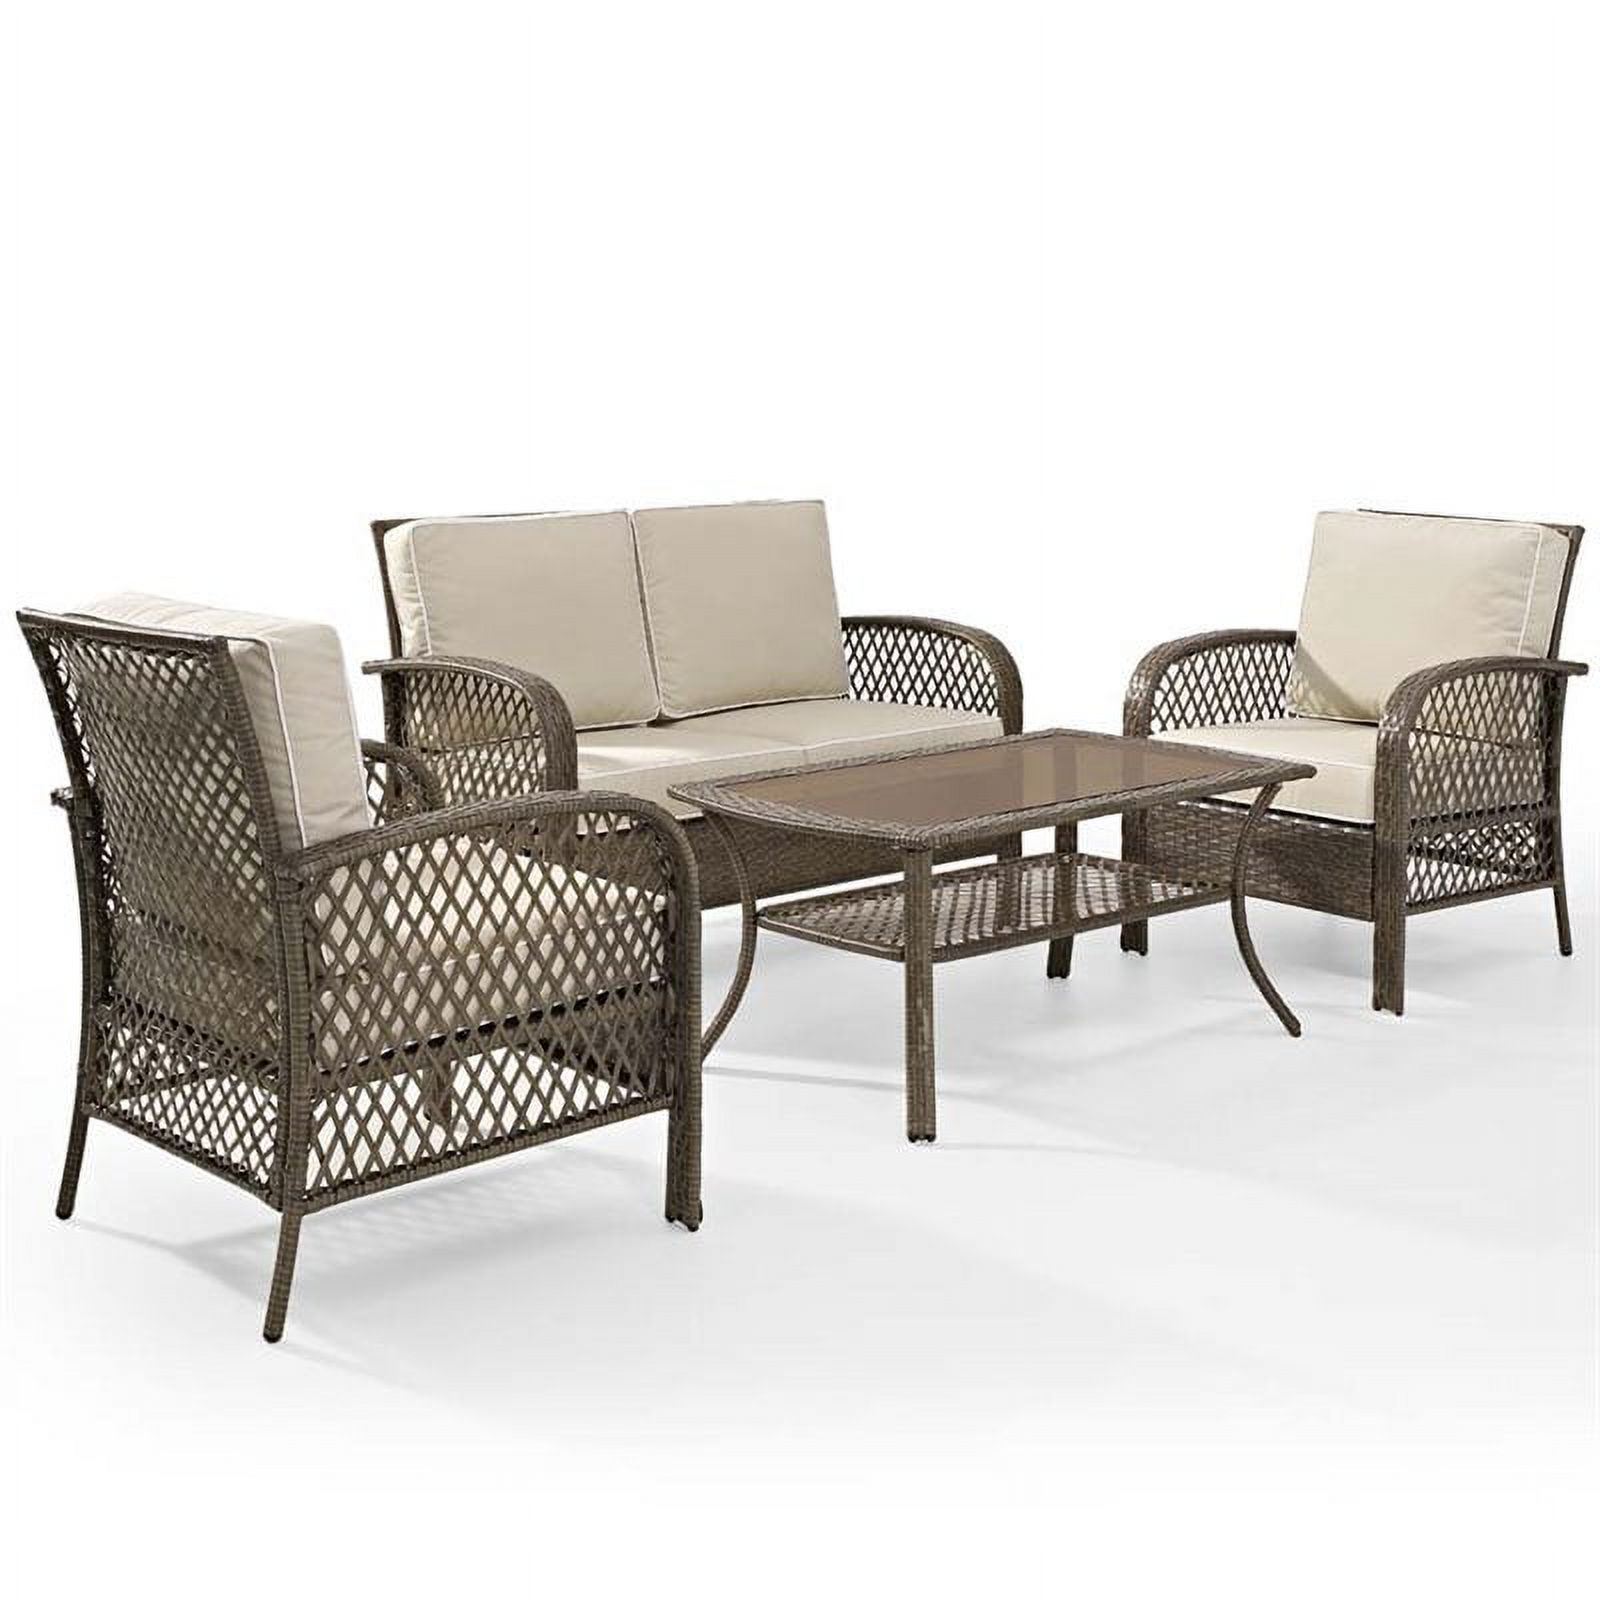 Crosley Furniture Tribeca 4 Piece Outdoor Wicker Seating Set With Sand Cushions - Loveseat, 2 Arm Chairs, And Coffee Table - image 3 of 7